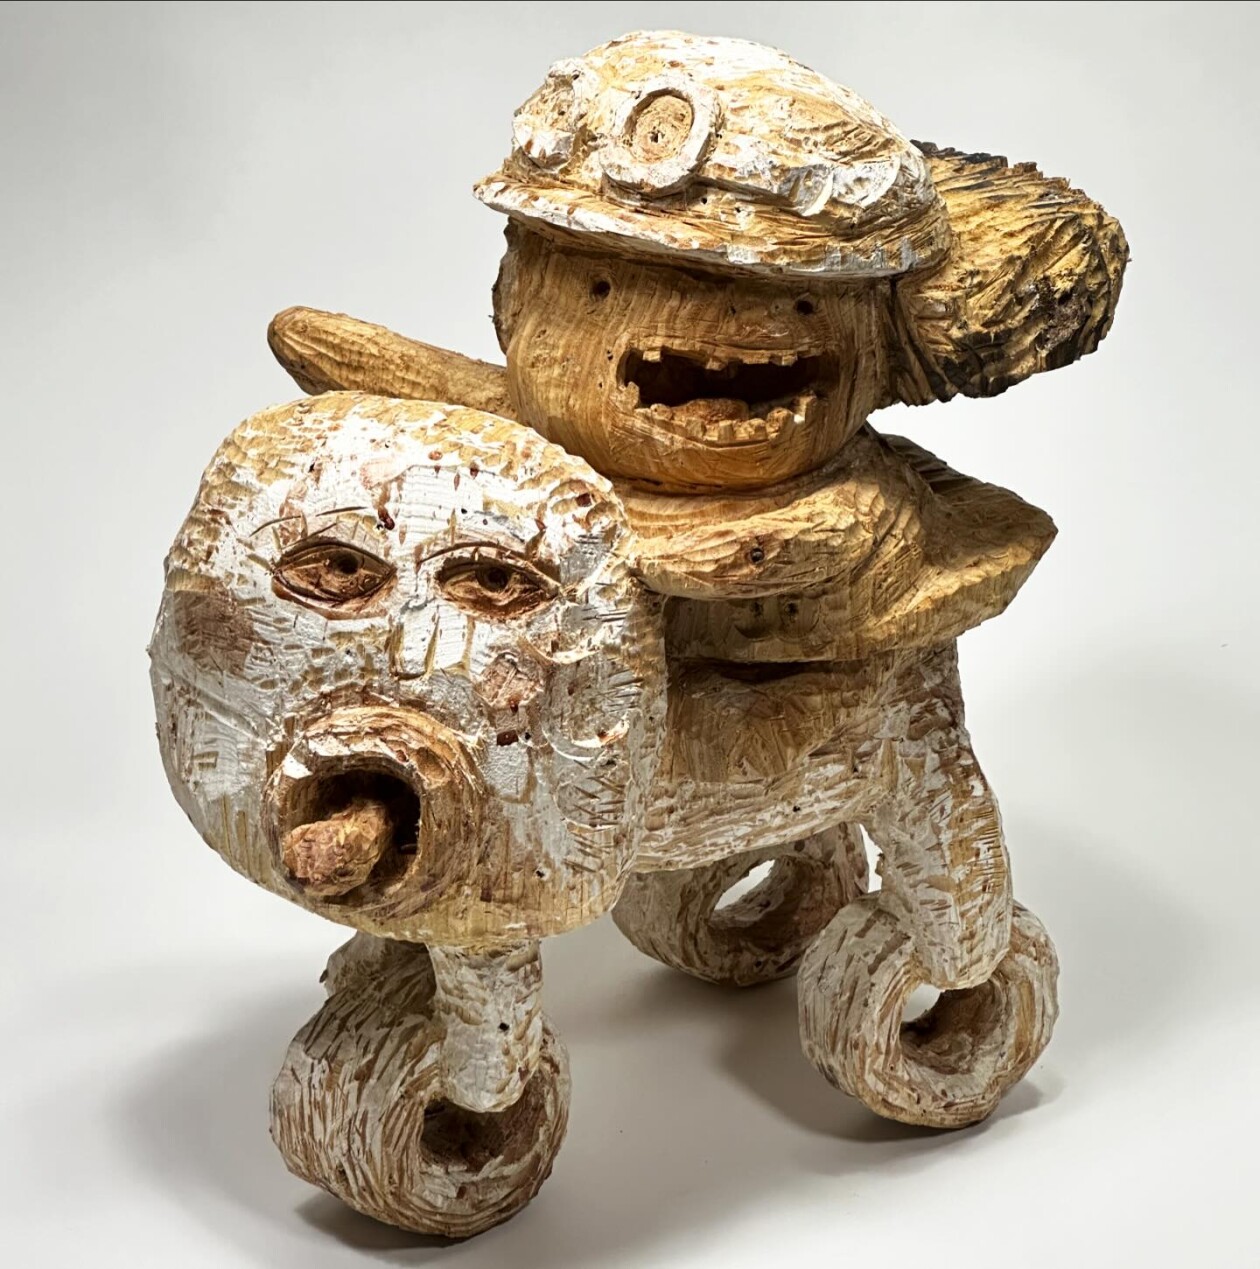 The Enchanting World Of Hirosuke Yabe's Wooden Beings (6)